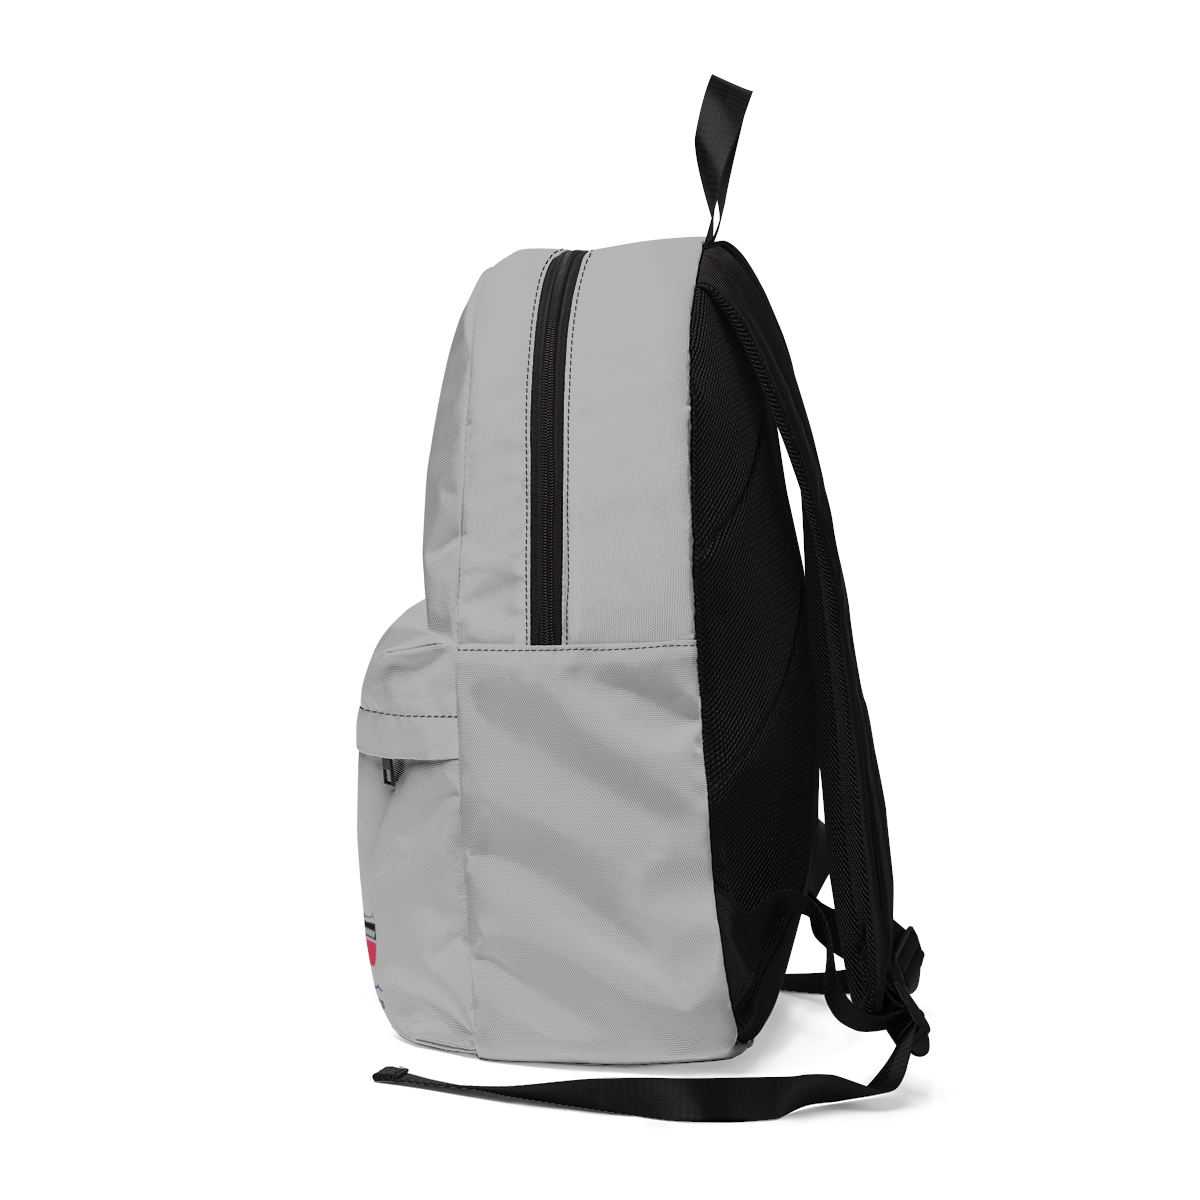 Copy of Unisex Classic Backpack product thumbnail image